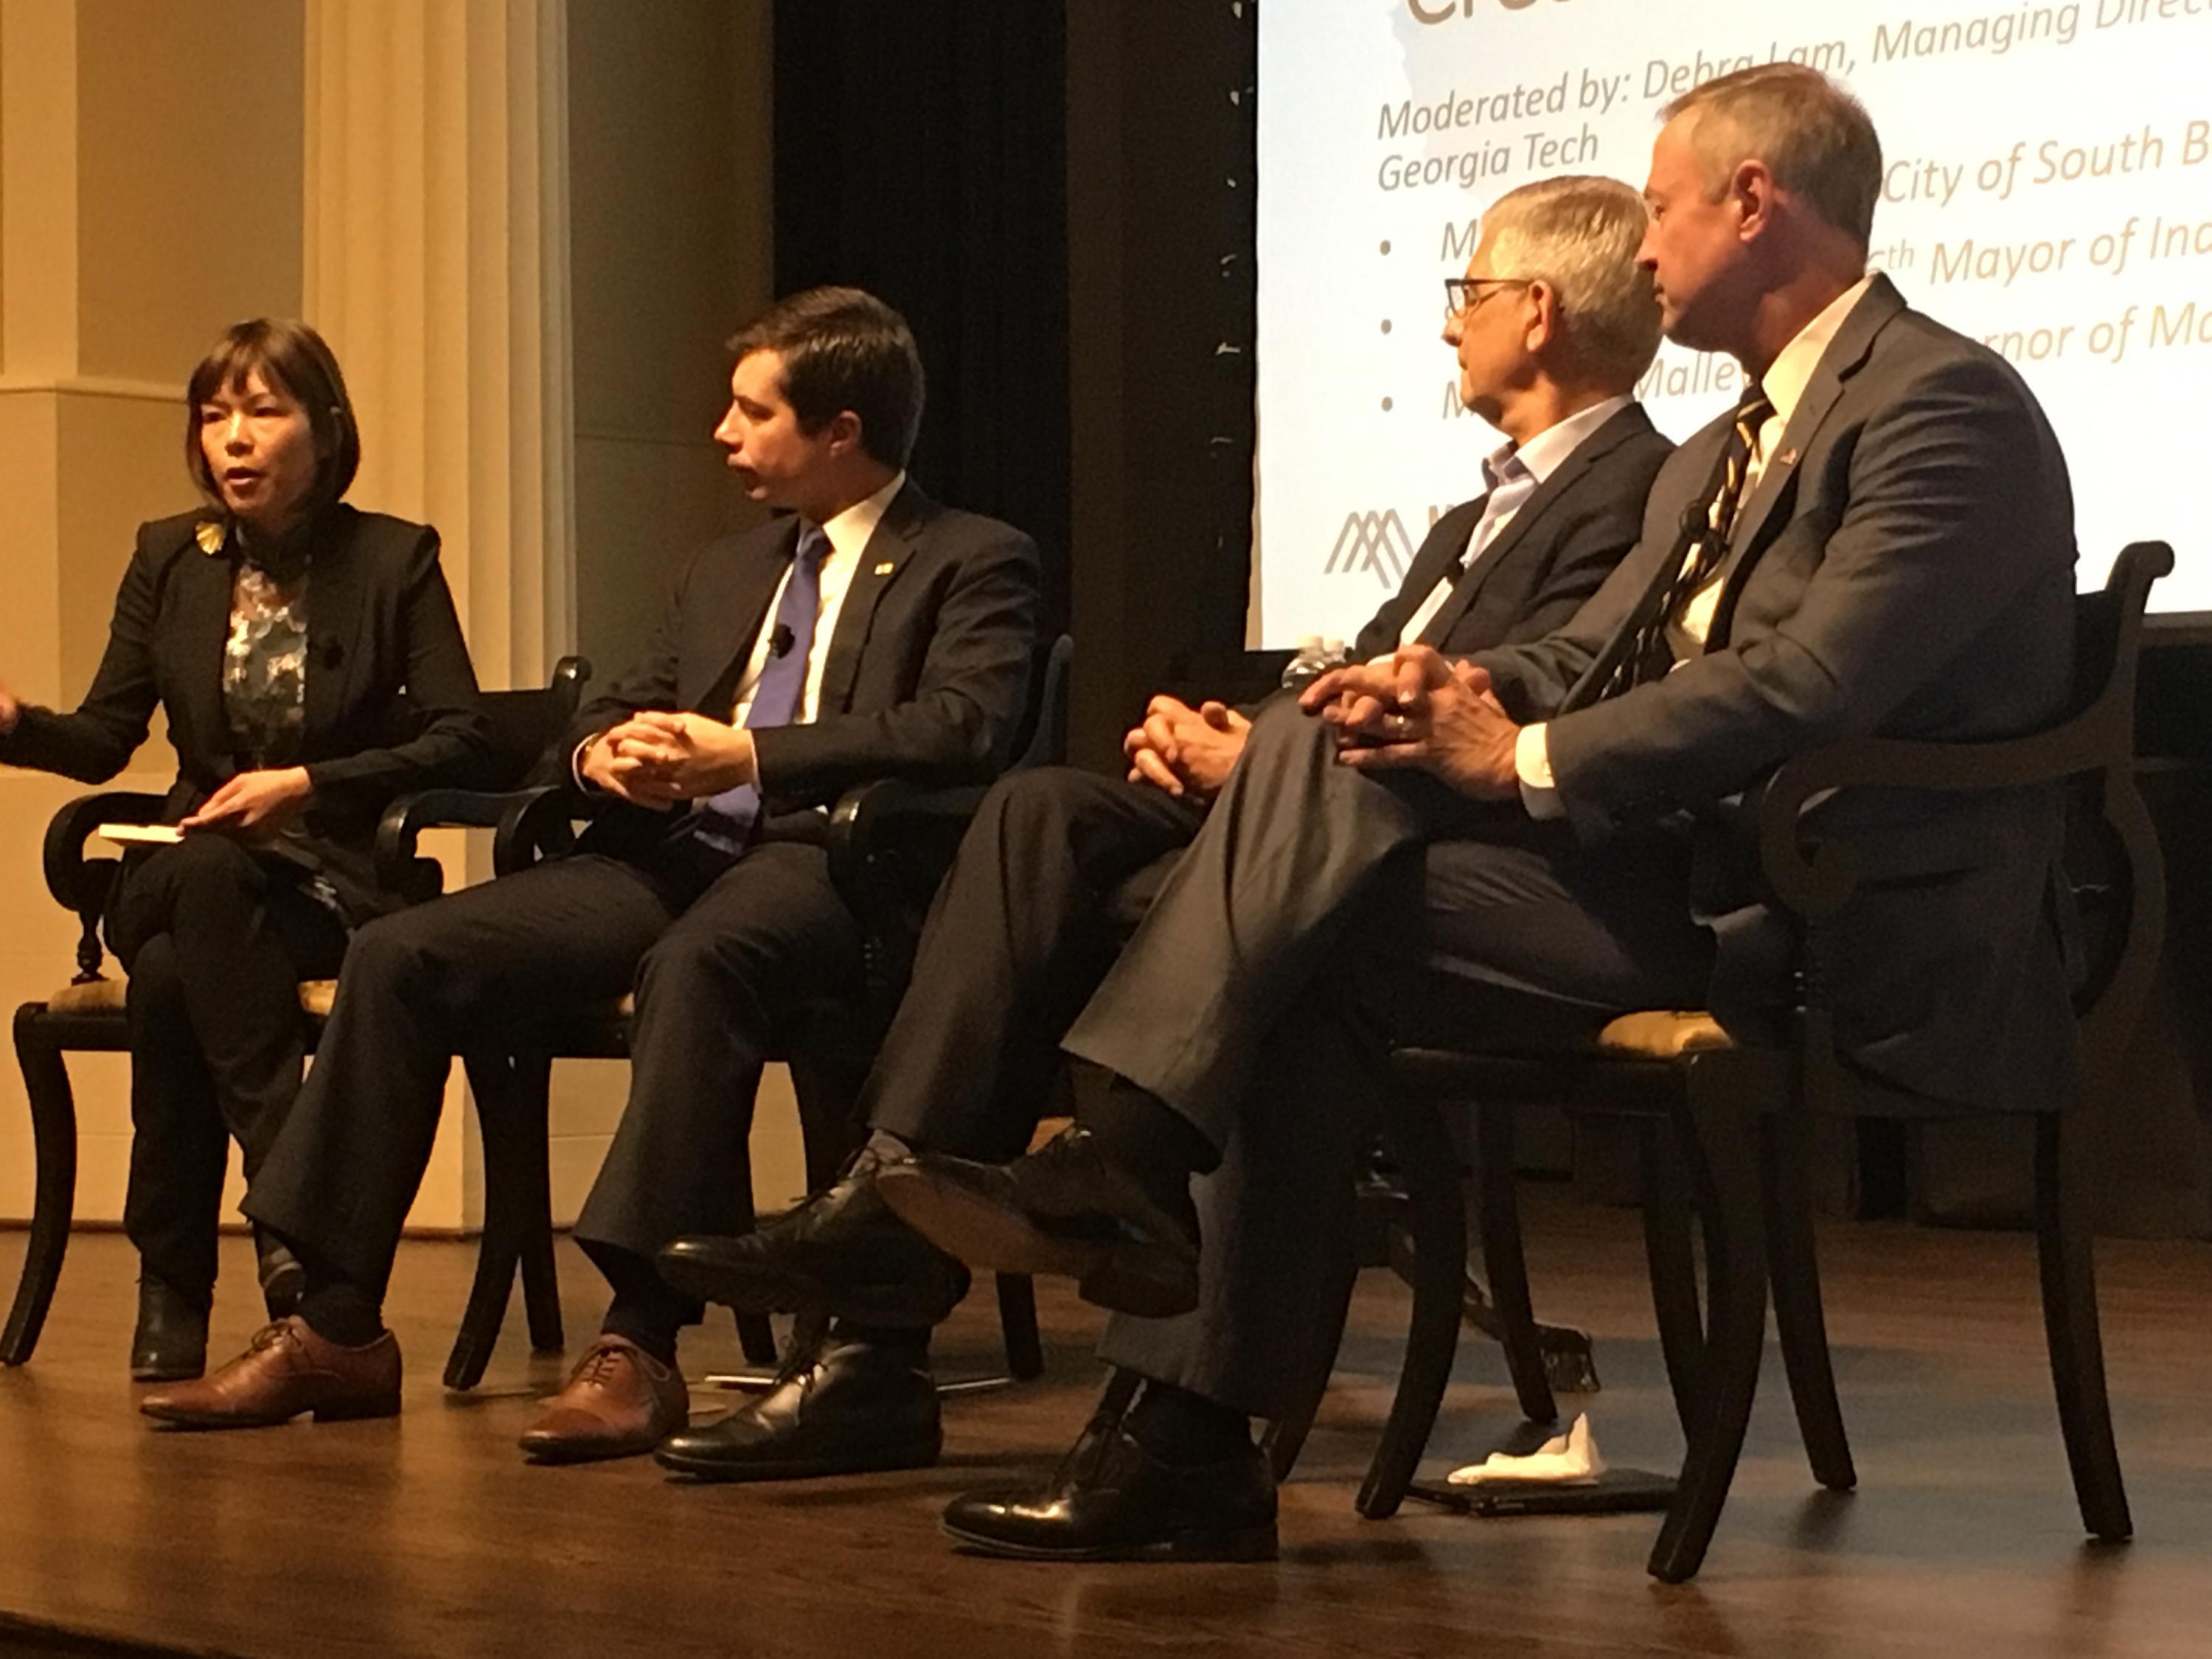 Left to right: SCII Managing Director, Debra Lam, South Bend, IN Mayor, Pete Buttigieg, former Governor of Maryland, Martin O’Malley, and former Mayor of Indianapolis, Stephen Goldsmith